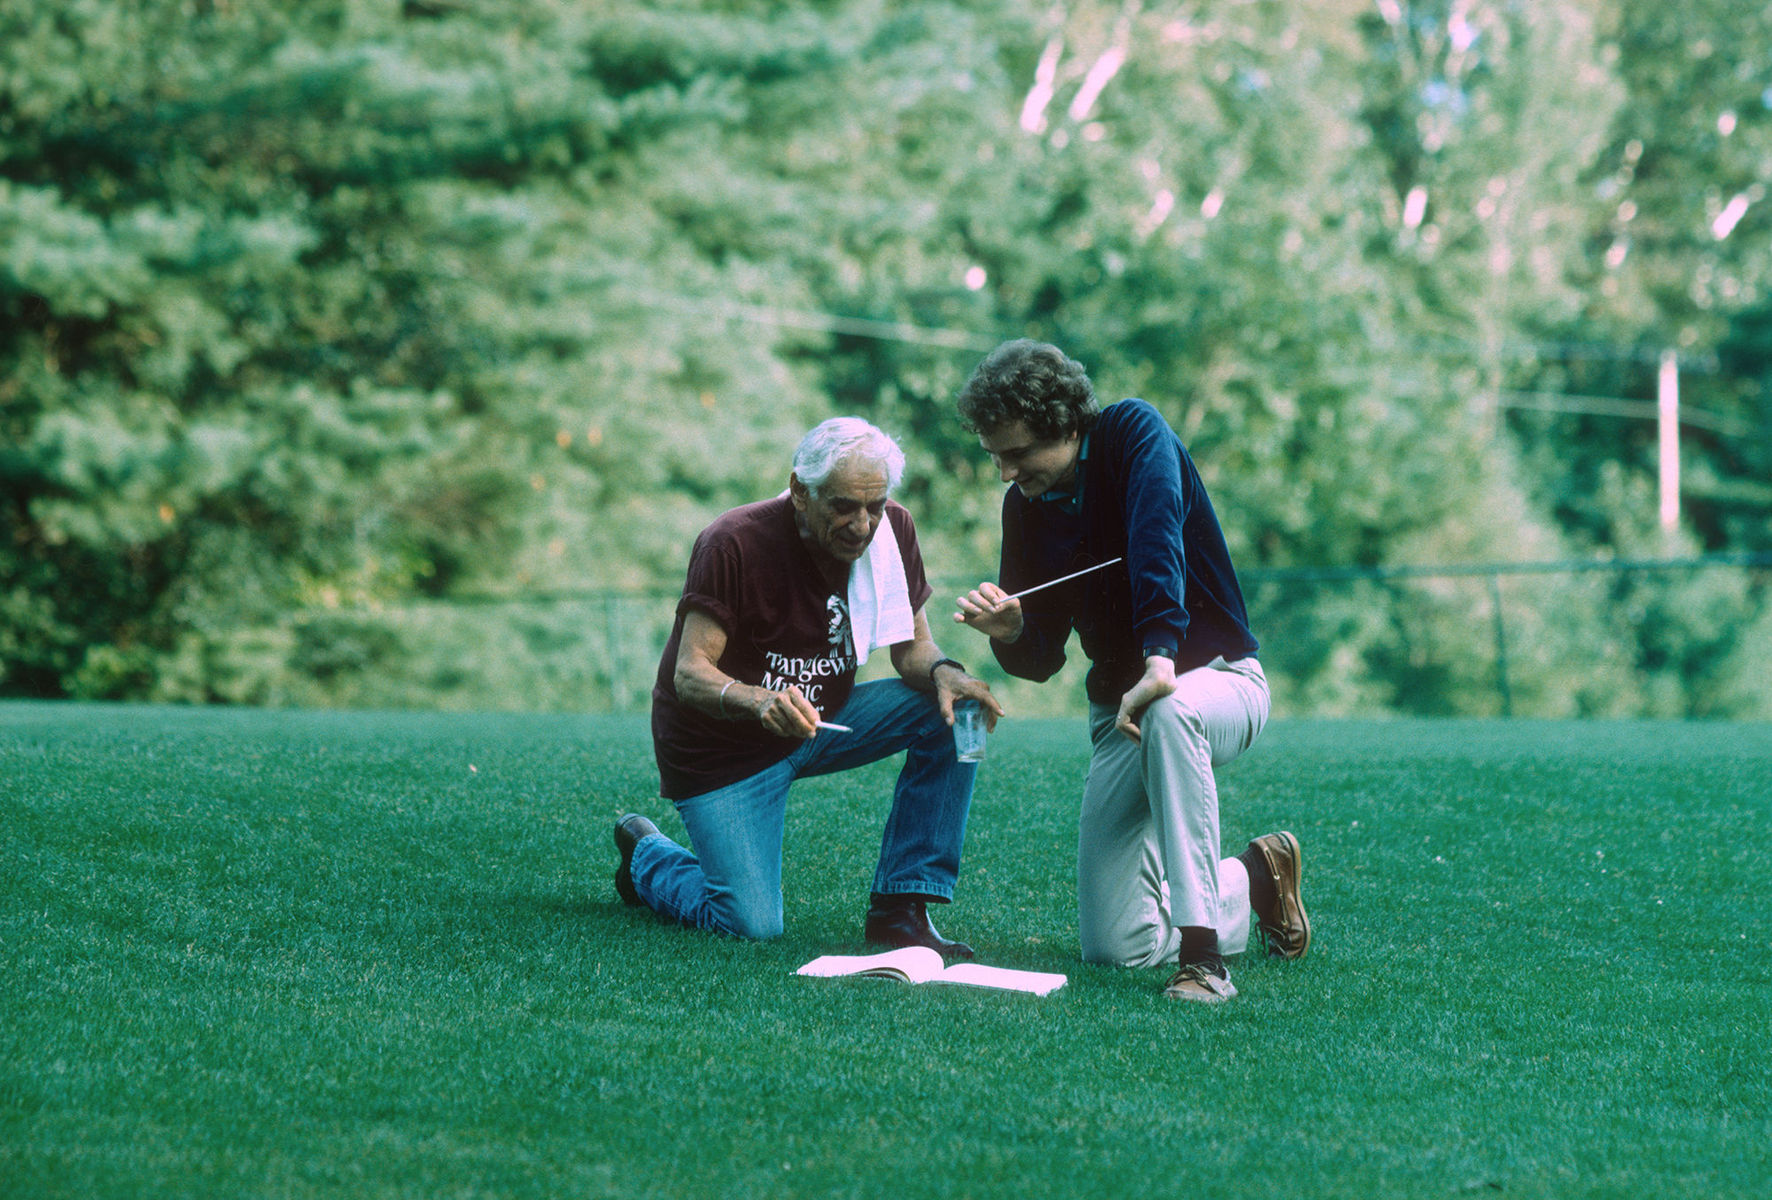 Leonard Bernstein with Conductor Richard Westerfield at Tanglewood, 1986 : The Arts : Photography by Adam Stoltman: Sports Photography, The Arts, Portraiture, Travel, Photojournalism and Fine Art in New York